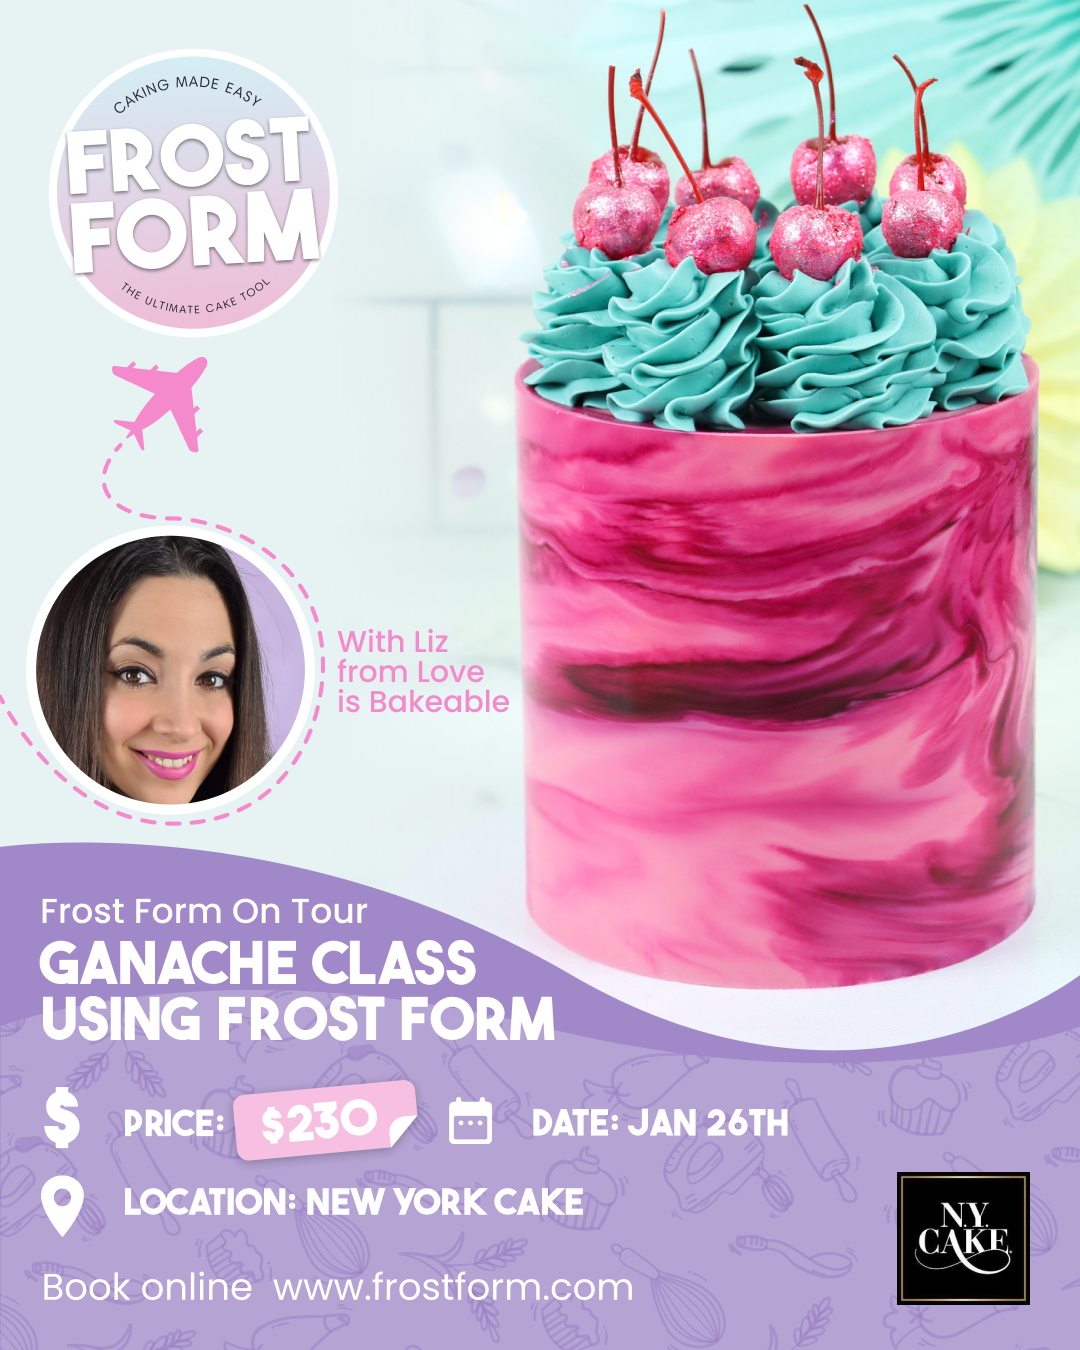 26th January - Frost Form On Tour -
Ganache Class Using Frost Form